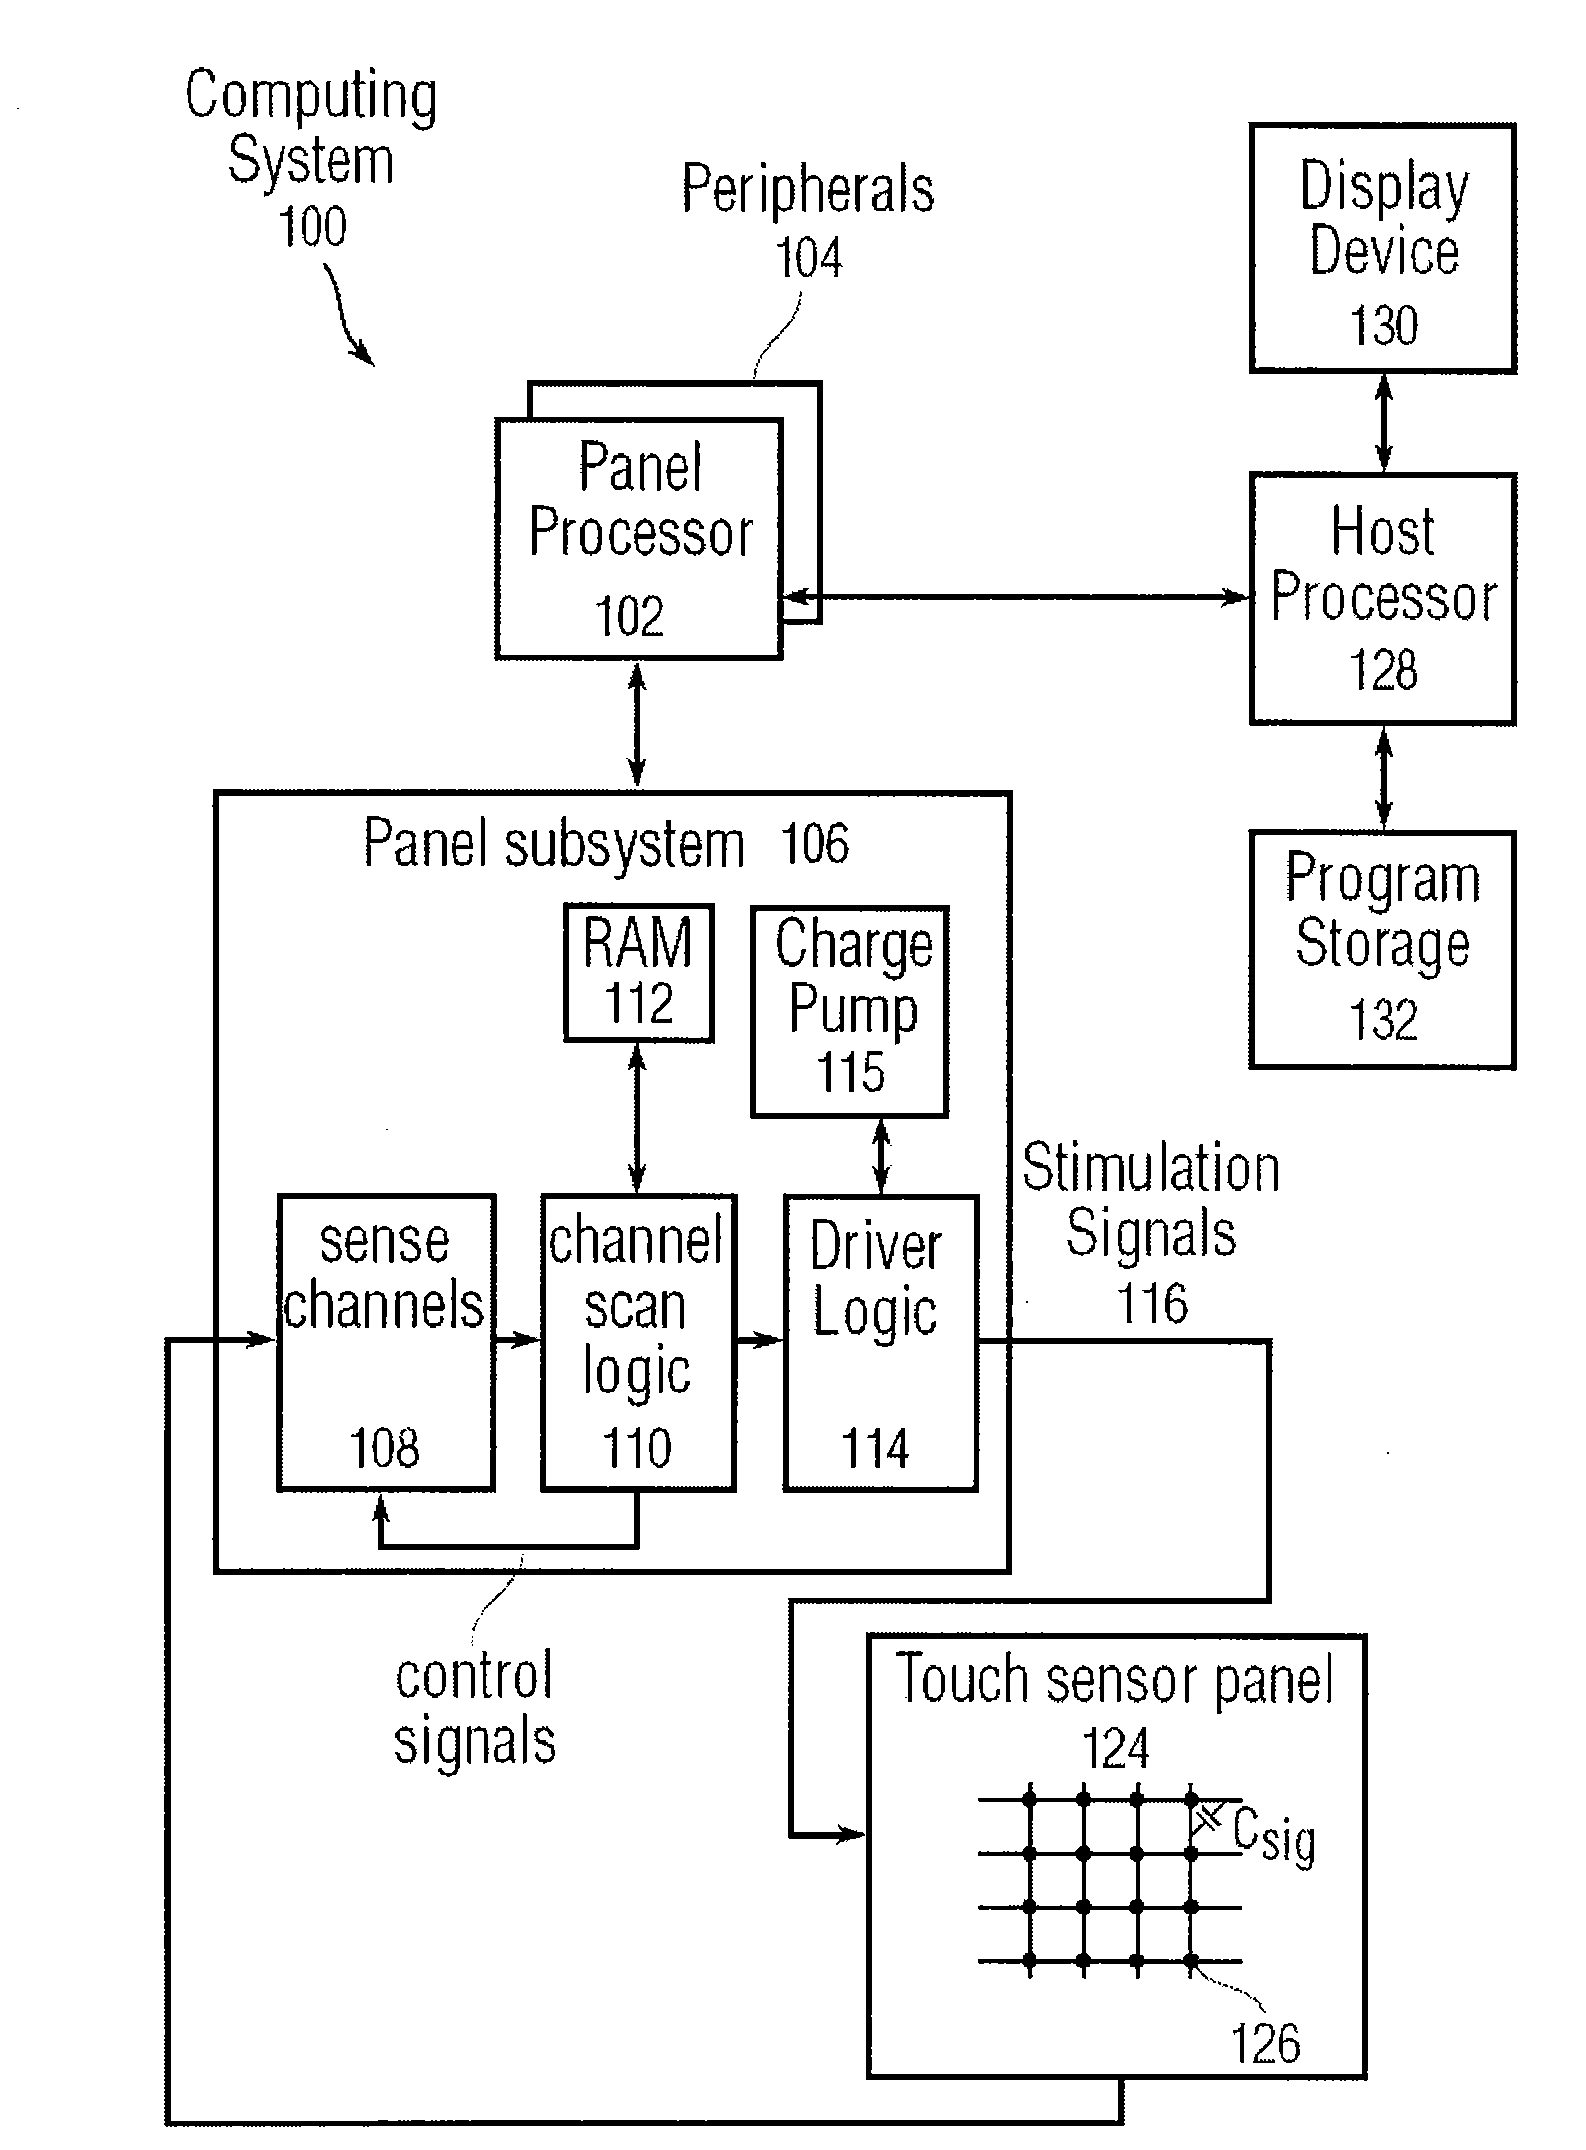 Channel Scan Architecture for Multiple Stimulus Multi-Touch Sensor Panels